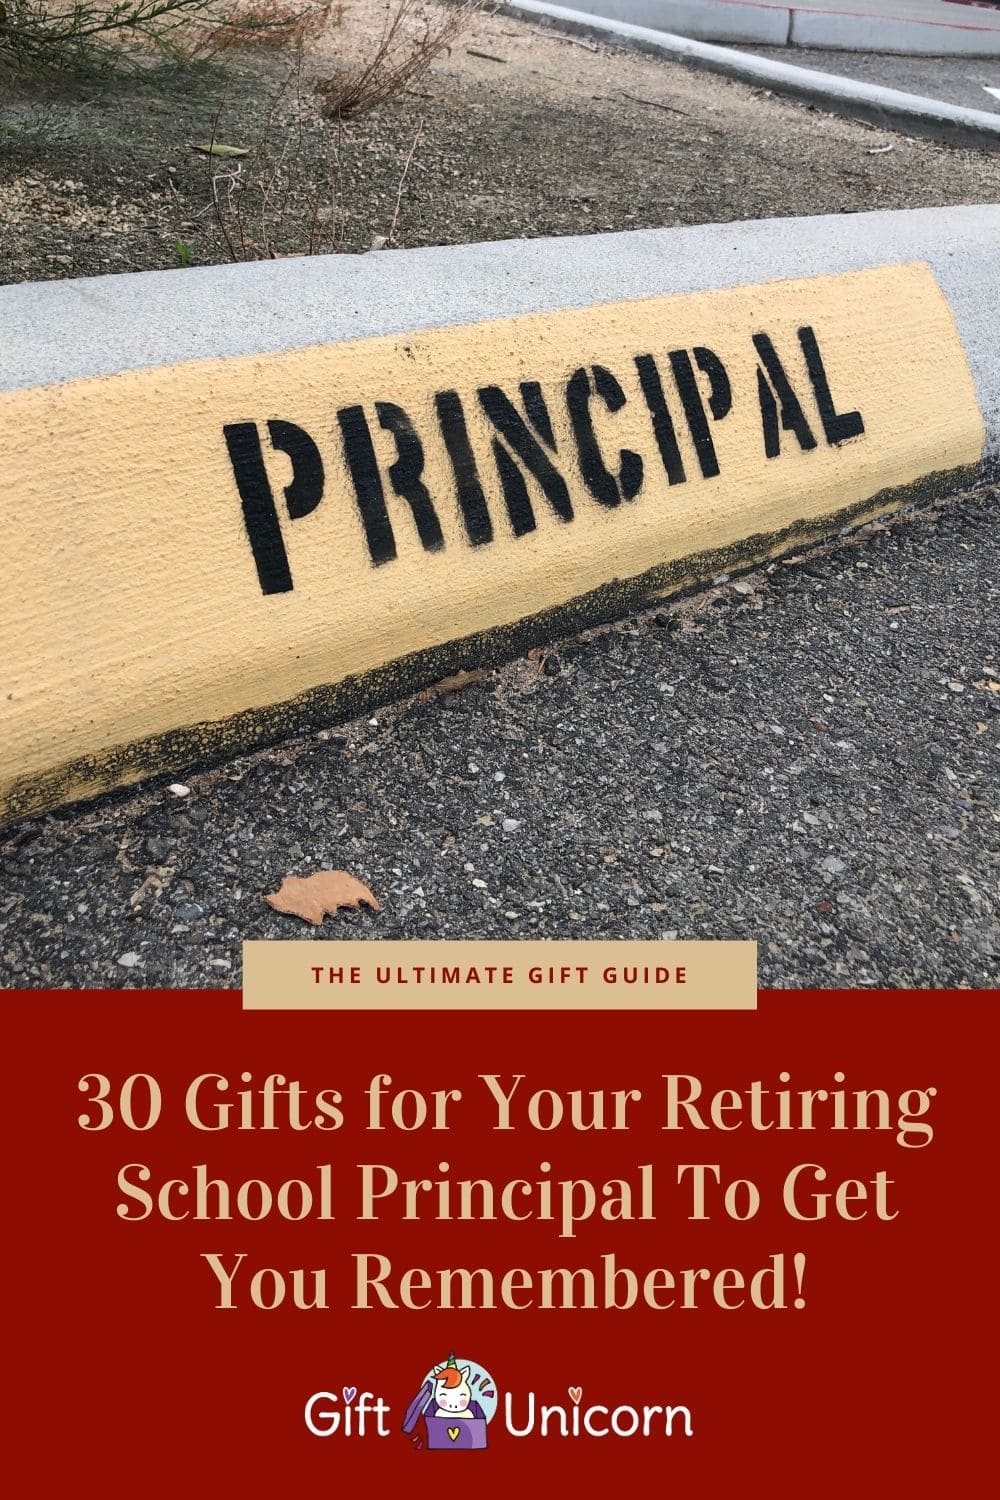 30 Gifts for Retiring School Principal (They’ll Remember You) - pinterest pin image